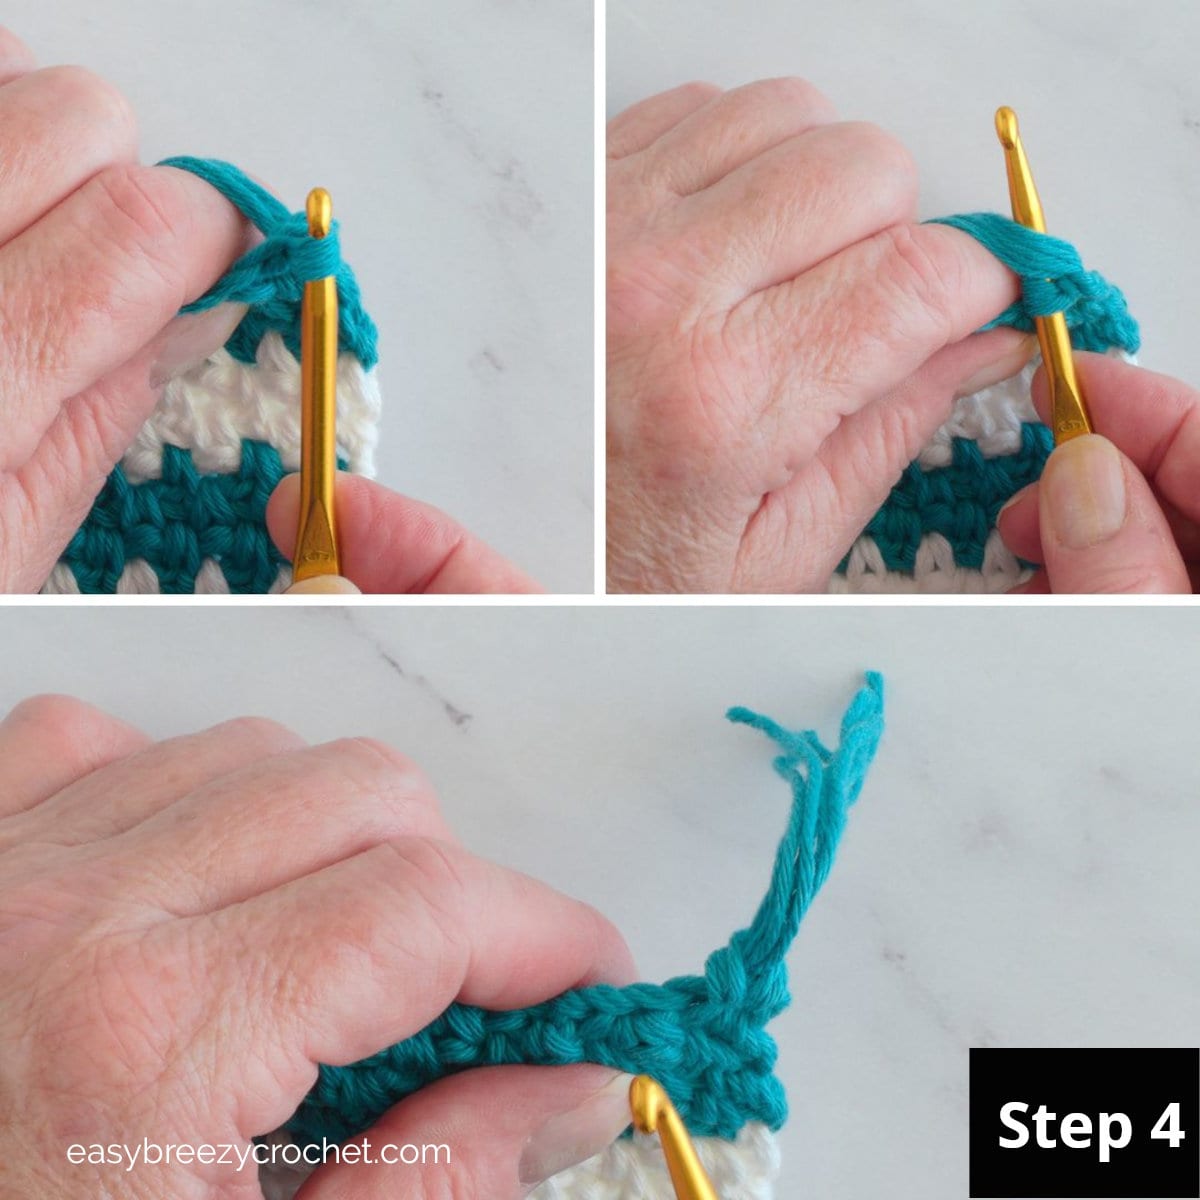 A three part image showing how to attach yarn to a crochet edge to create a fringe.
